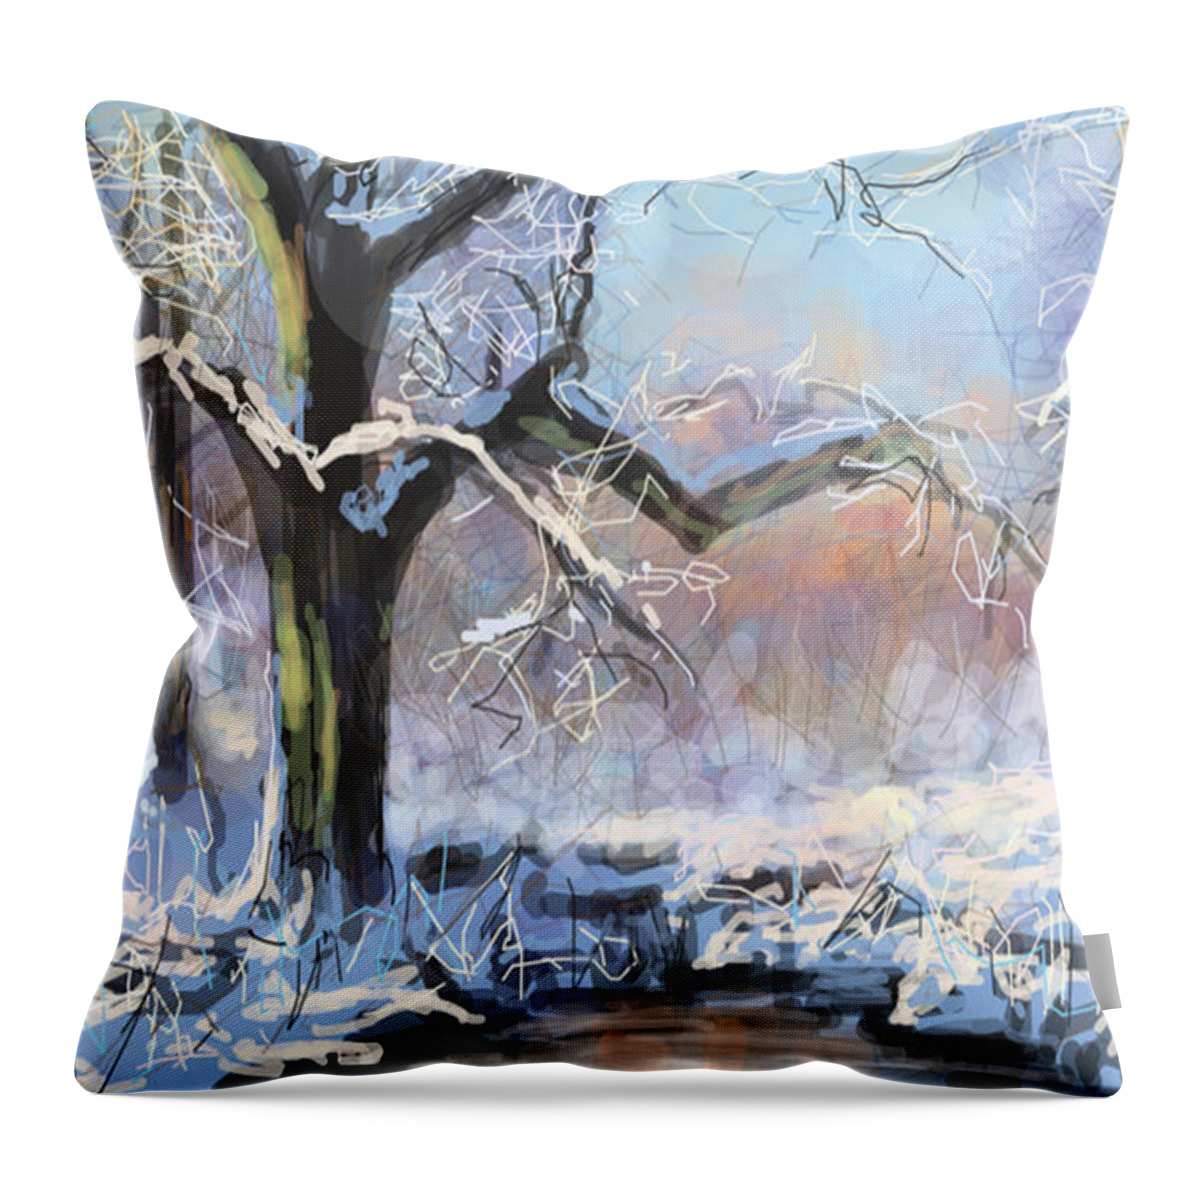 Winter Throw Pillow featuring the painting Winter by Angie Braun